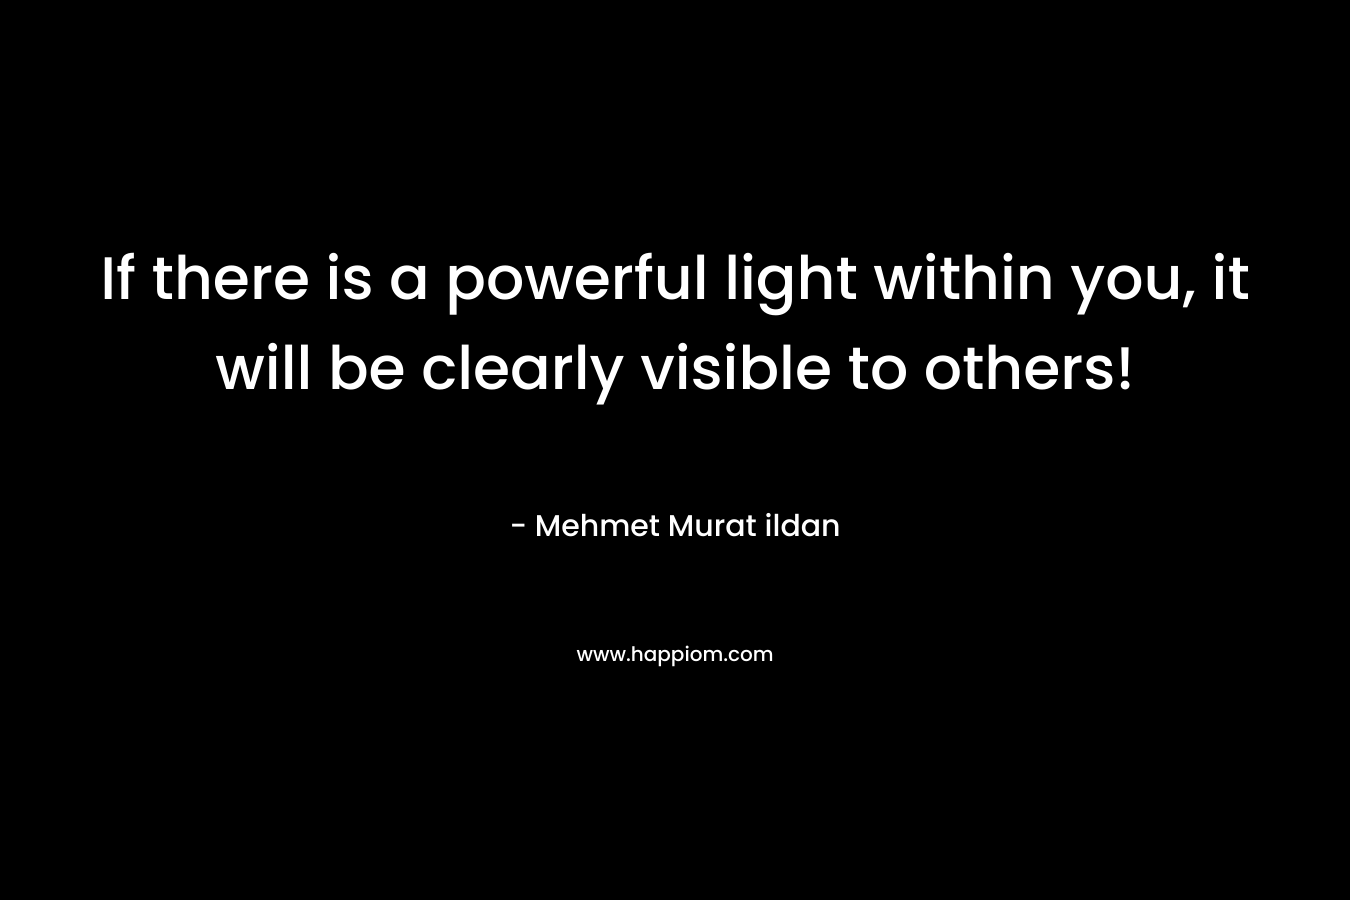 If there is a powerful light within you, it will be clearly visible to others!